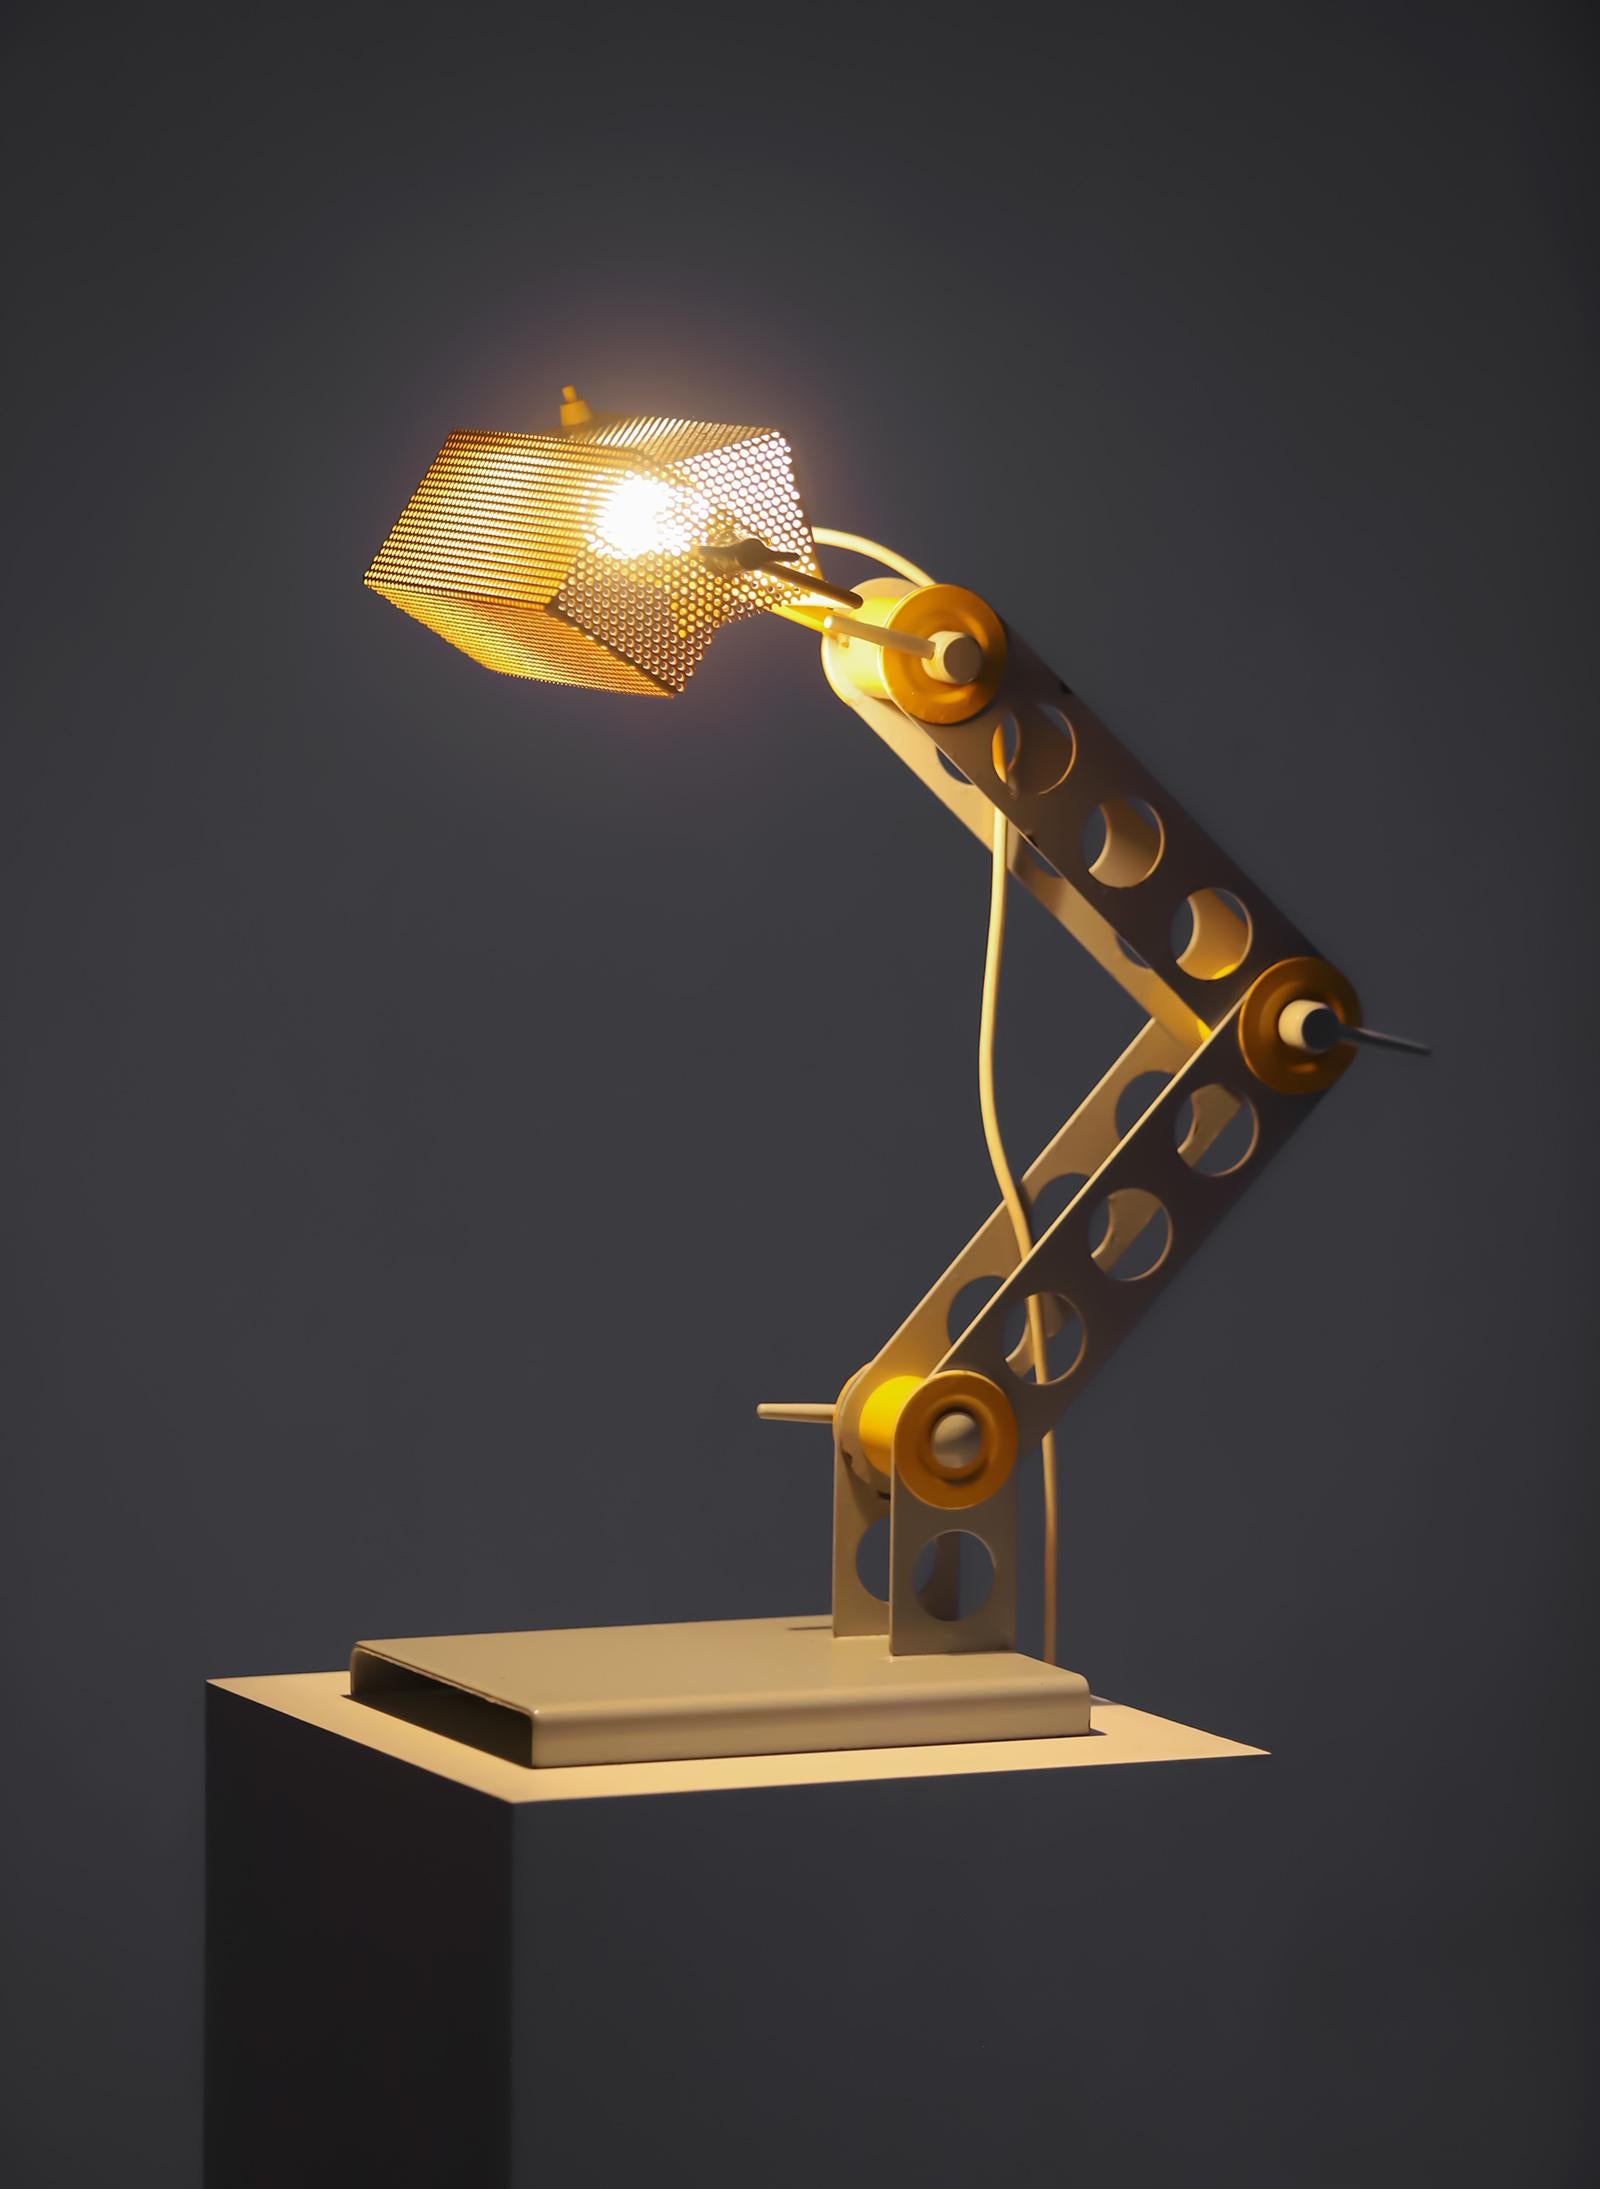 playful metal table lamp in Memphis Milano and meccano style made in Italy For Sale 5